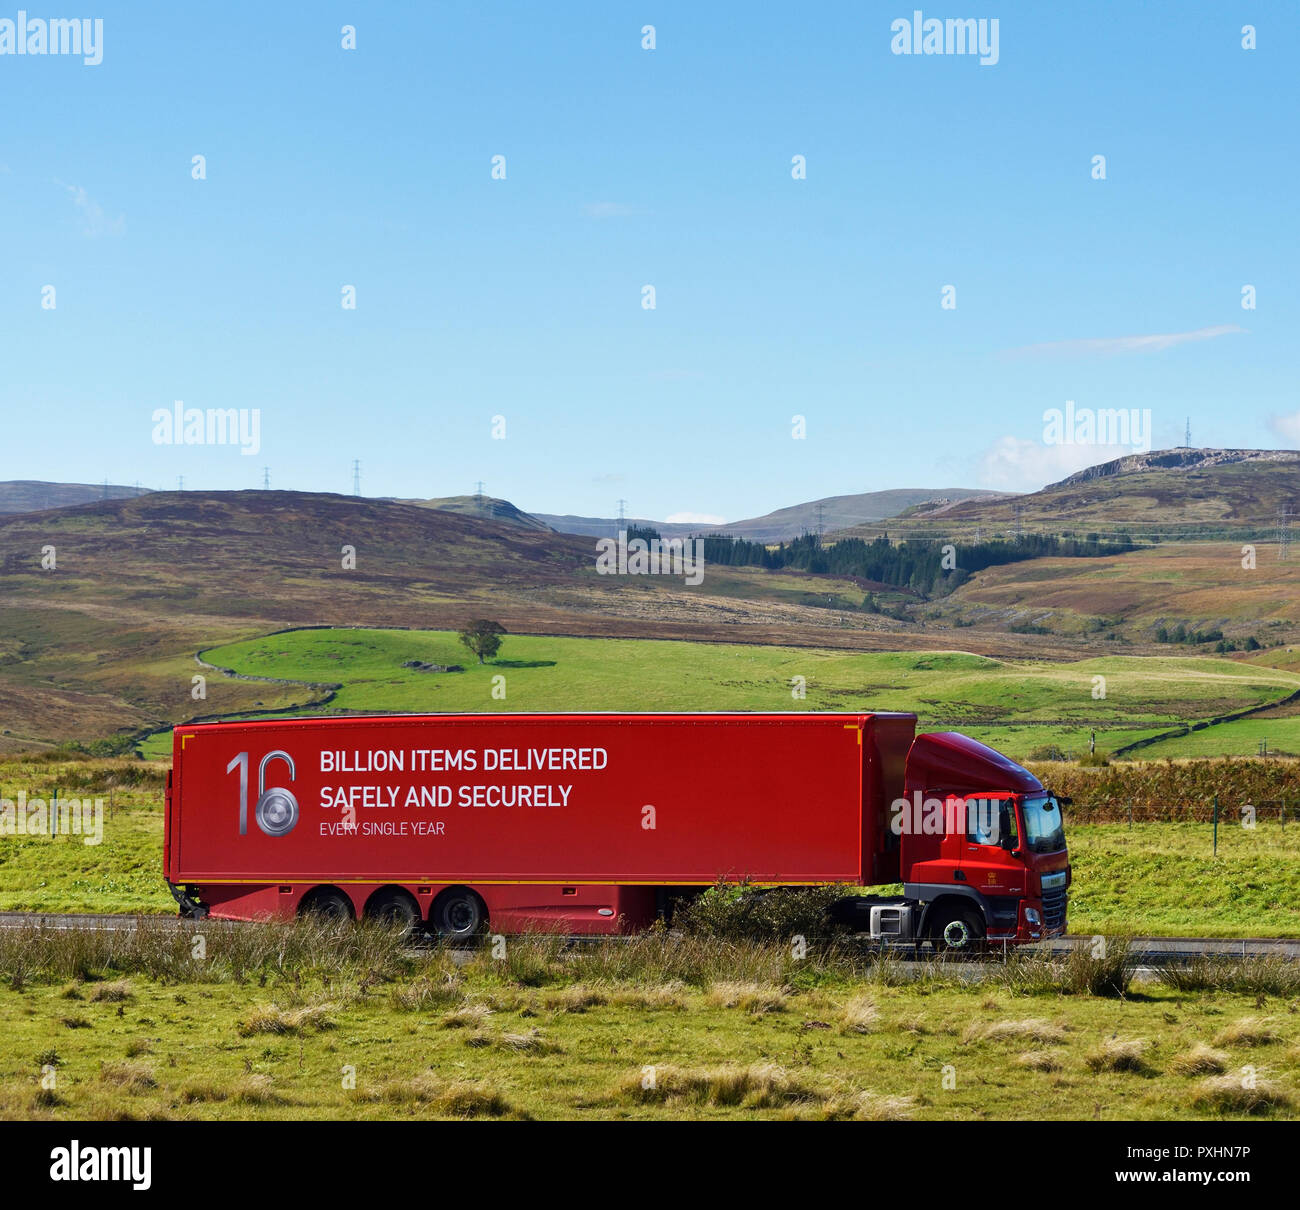 16 Billion Items Delivered Safely and Securely Every Single Year. Royal Mail HGV. M6 Northbound carriageway, Shap, Cumbria, England, United Kingdom, E Stock Photo